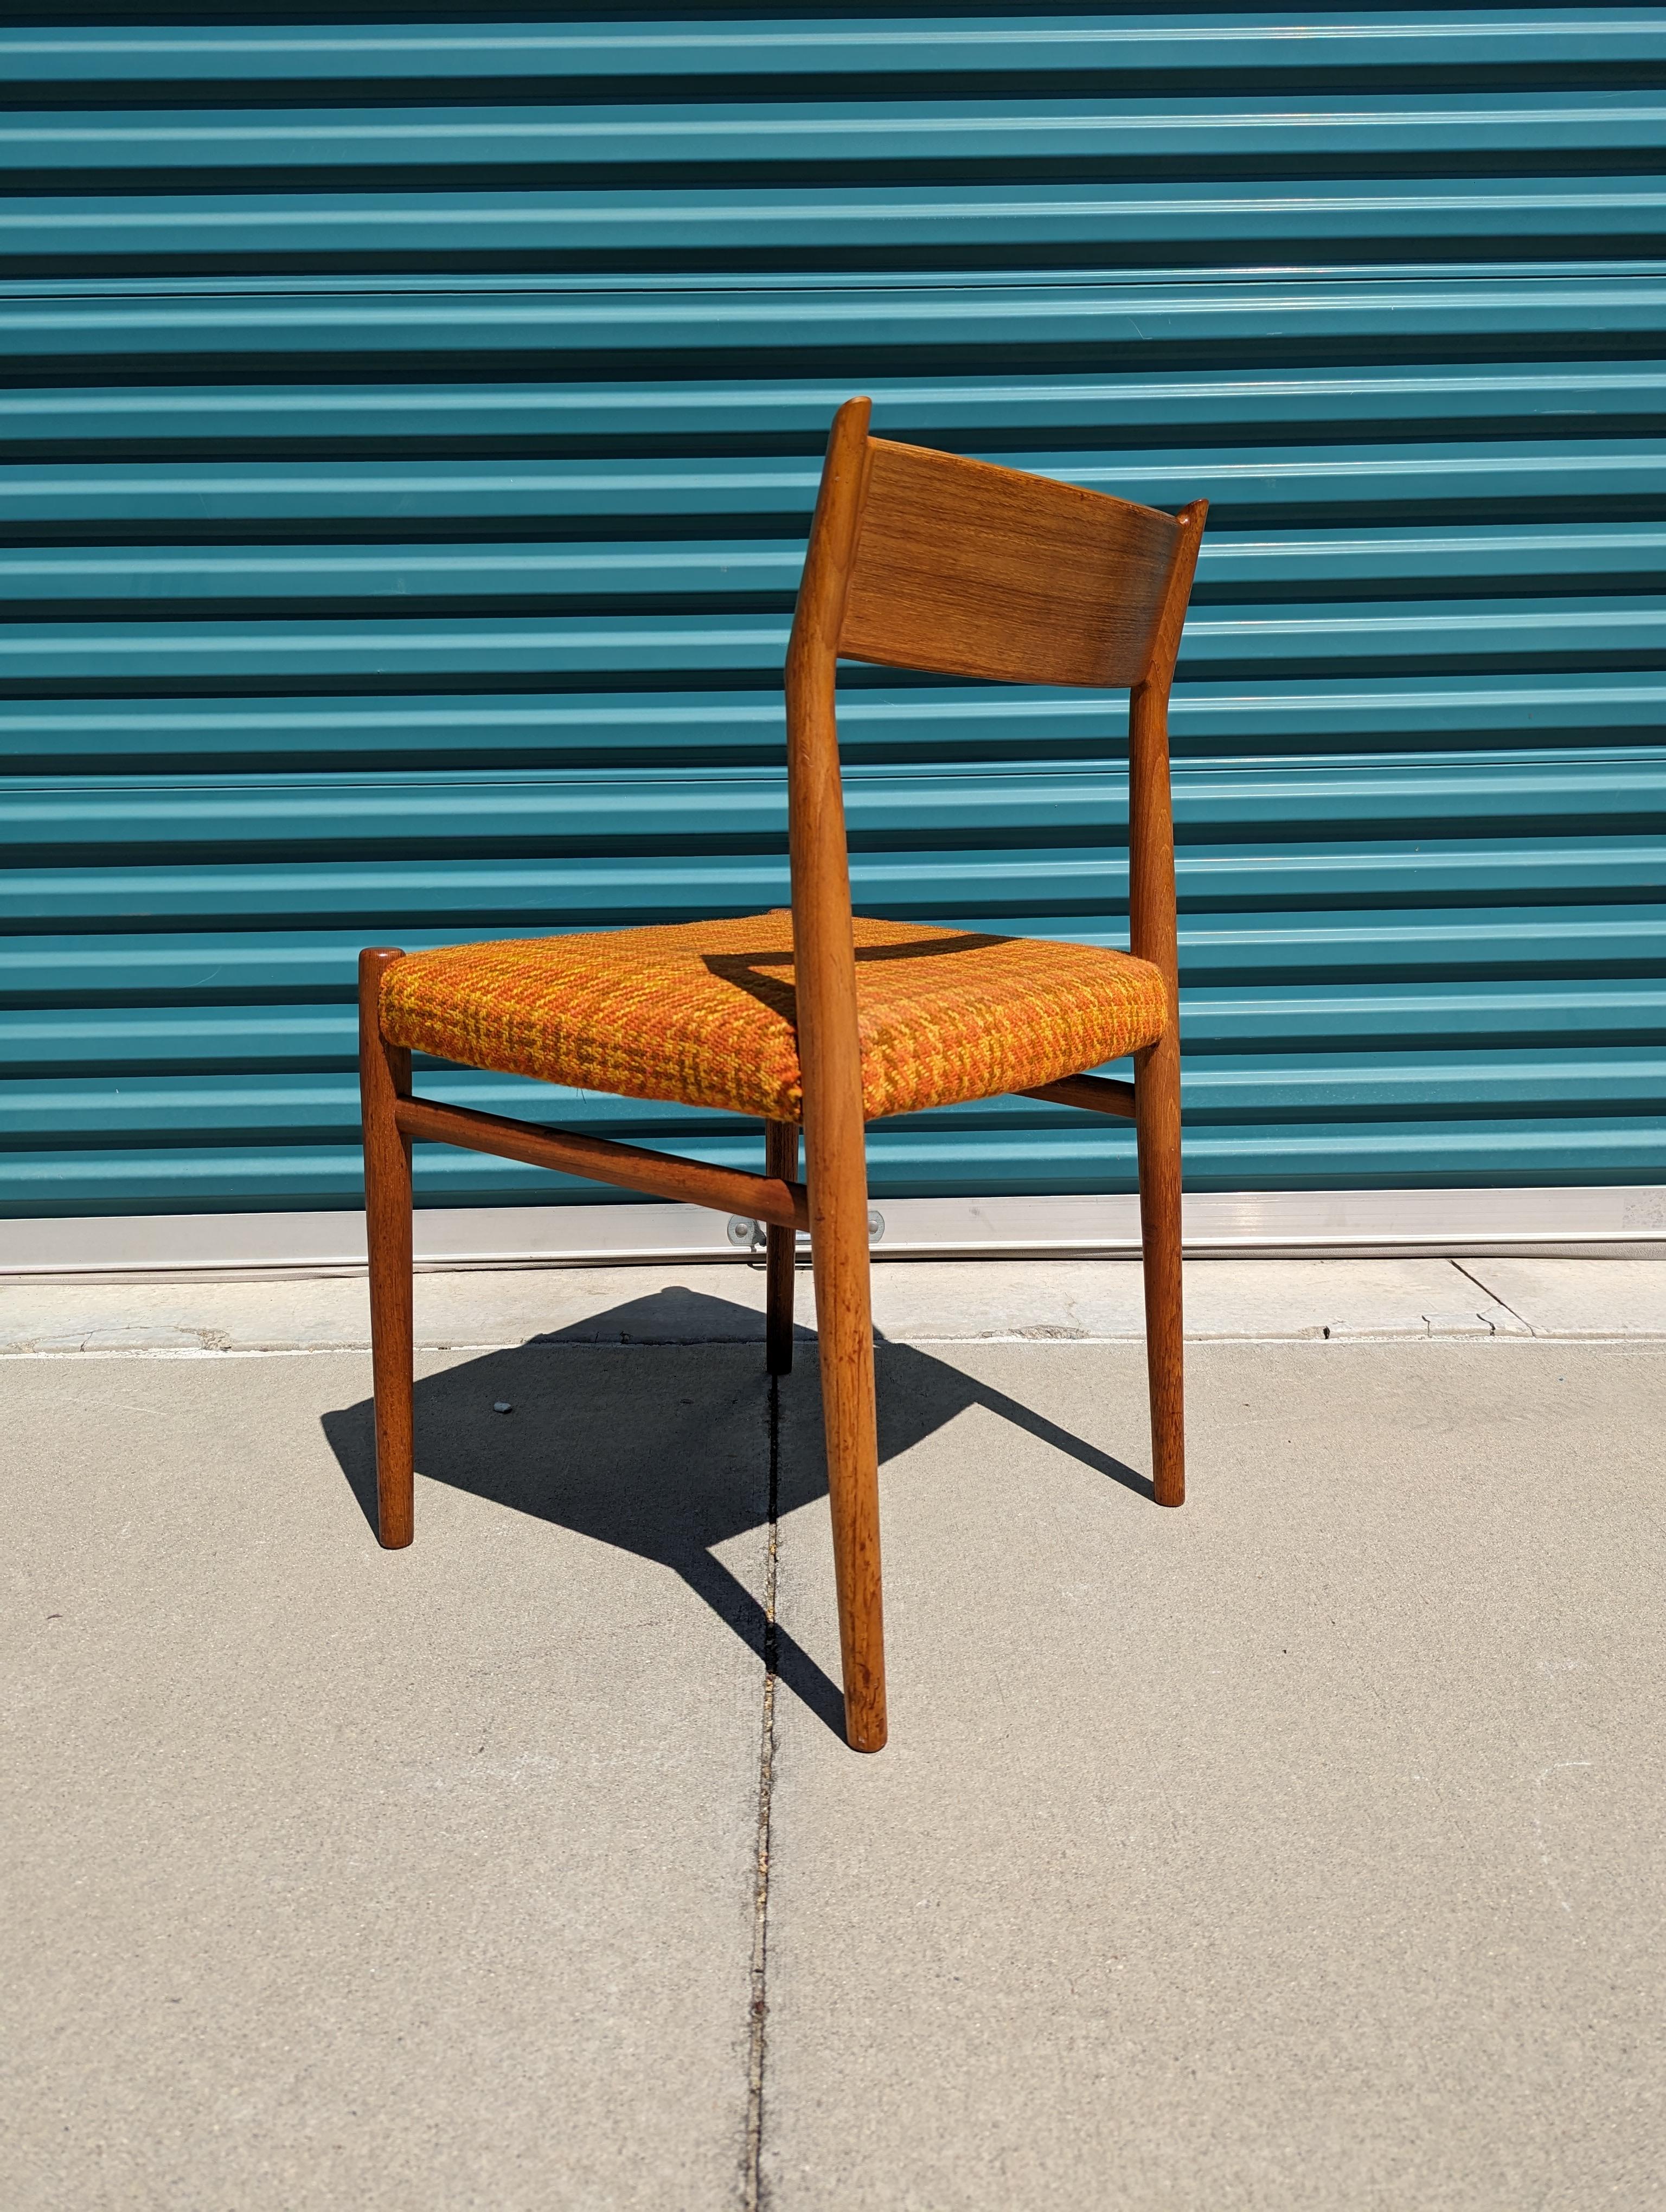 Vintage Danish modern dining chairs by Arne Vodder for Sibast. Model 418 manufactured in Denmark. The chair is in original condition with minor wear throughout typical of age. Overall structurally sound and ready for use. Would pair well as a desk